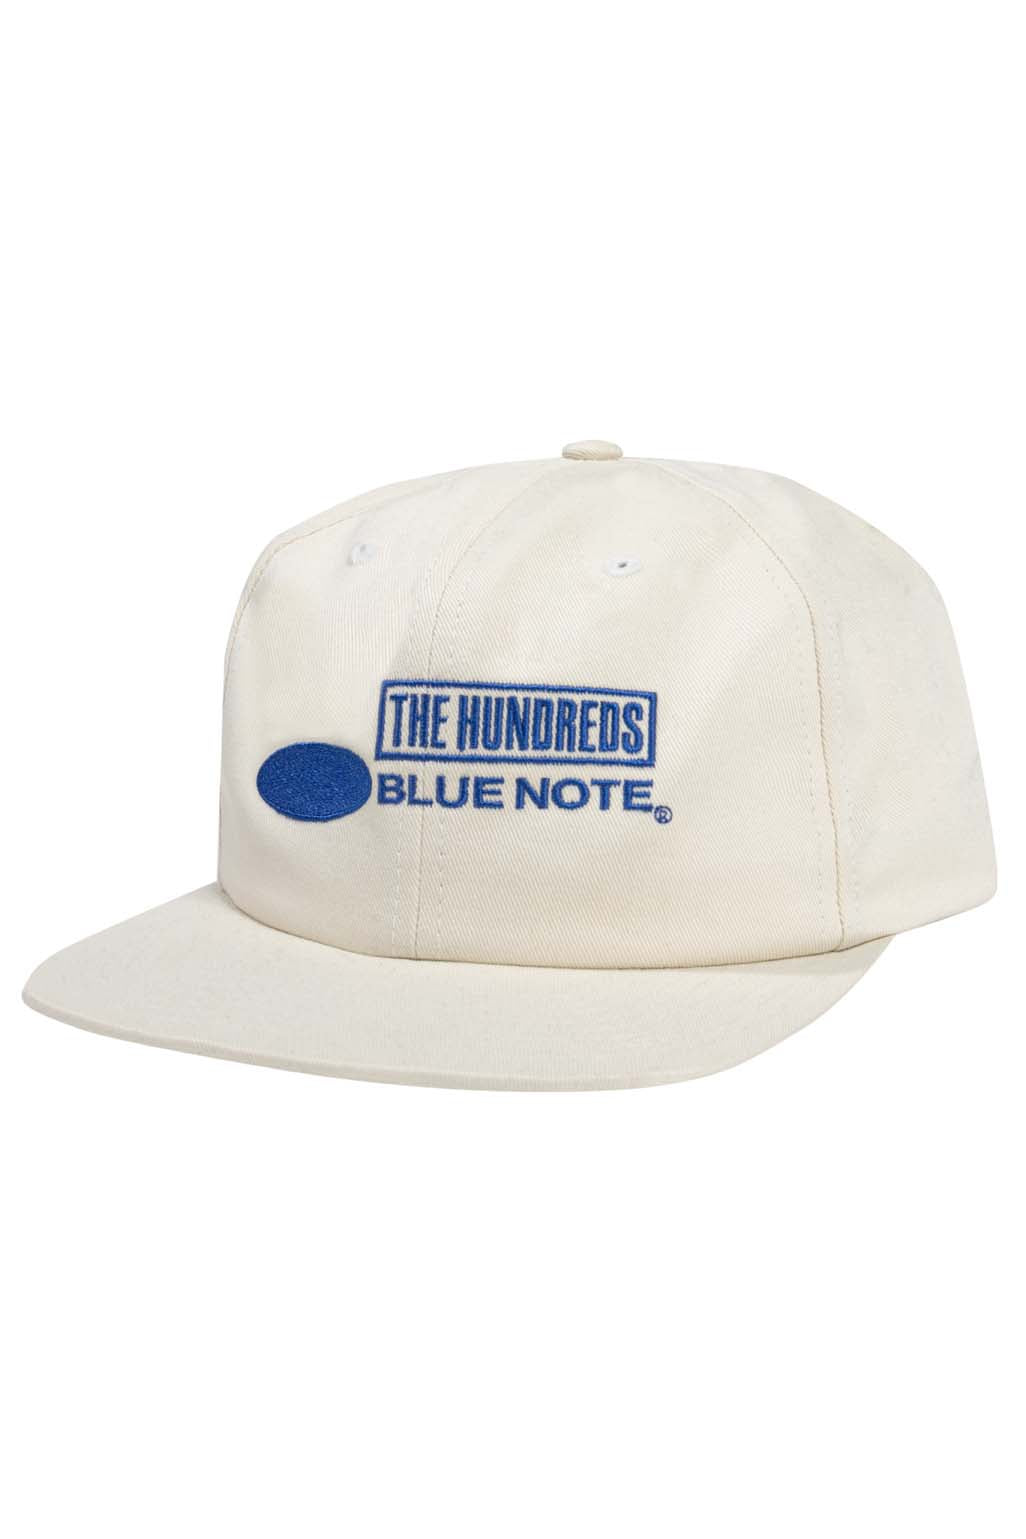 The Hundreds X Blue Note Records